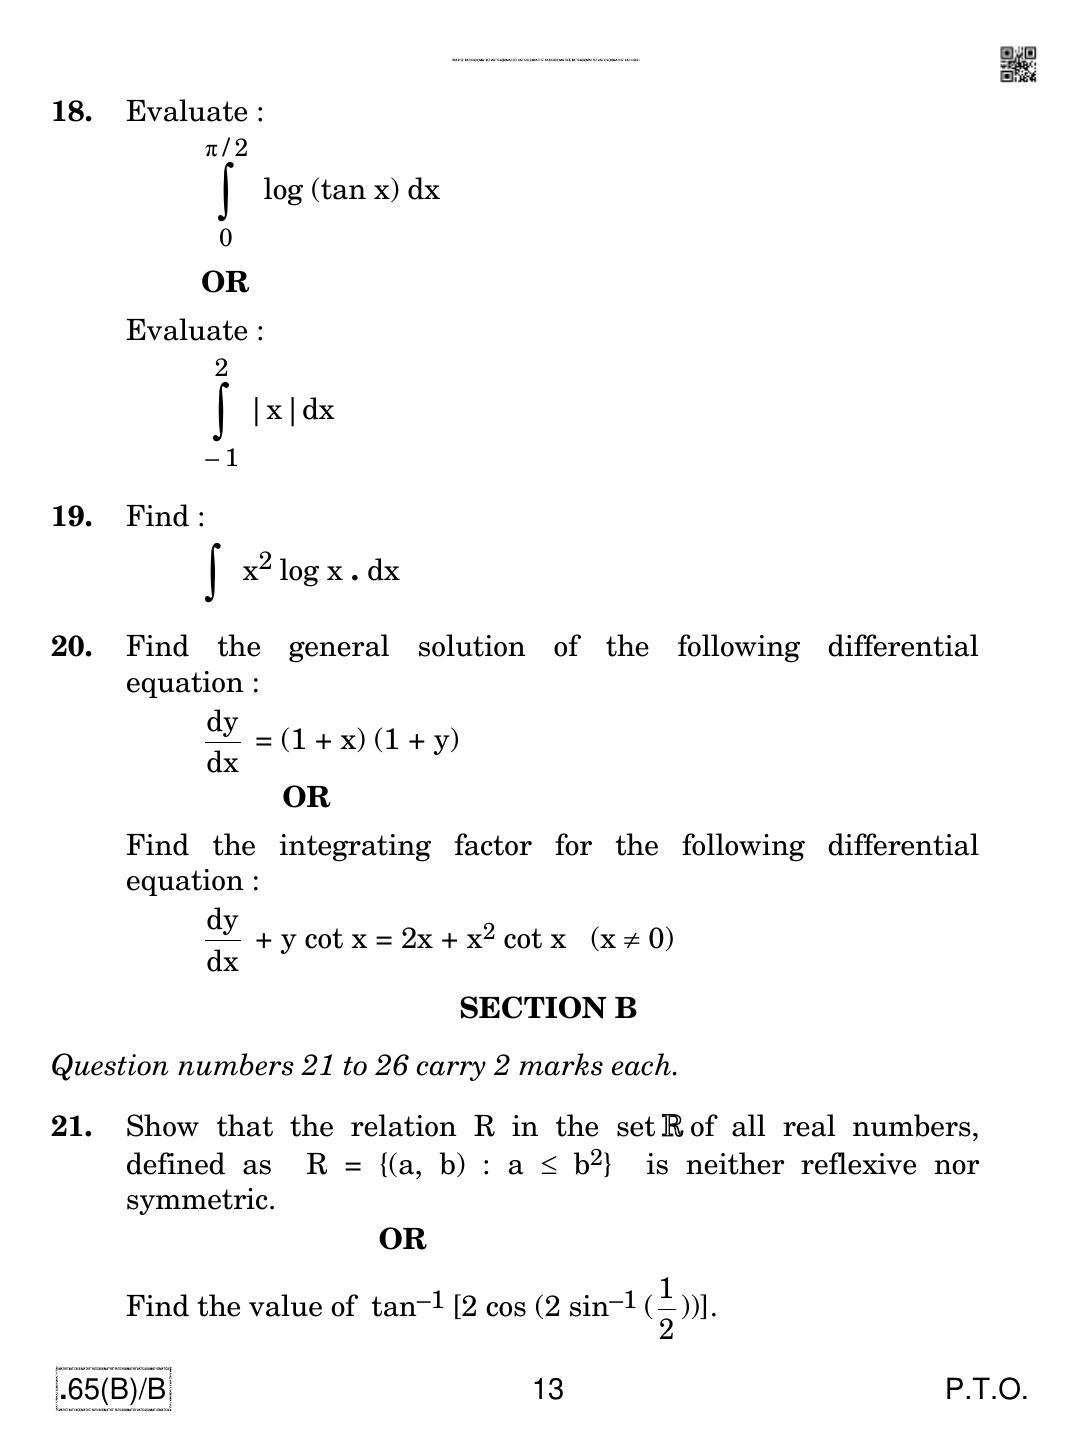 CBSE Class 12 65(B)-C - Maths For Blind Candidates 2020 Compartment Question Paper - Page 13